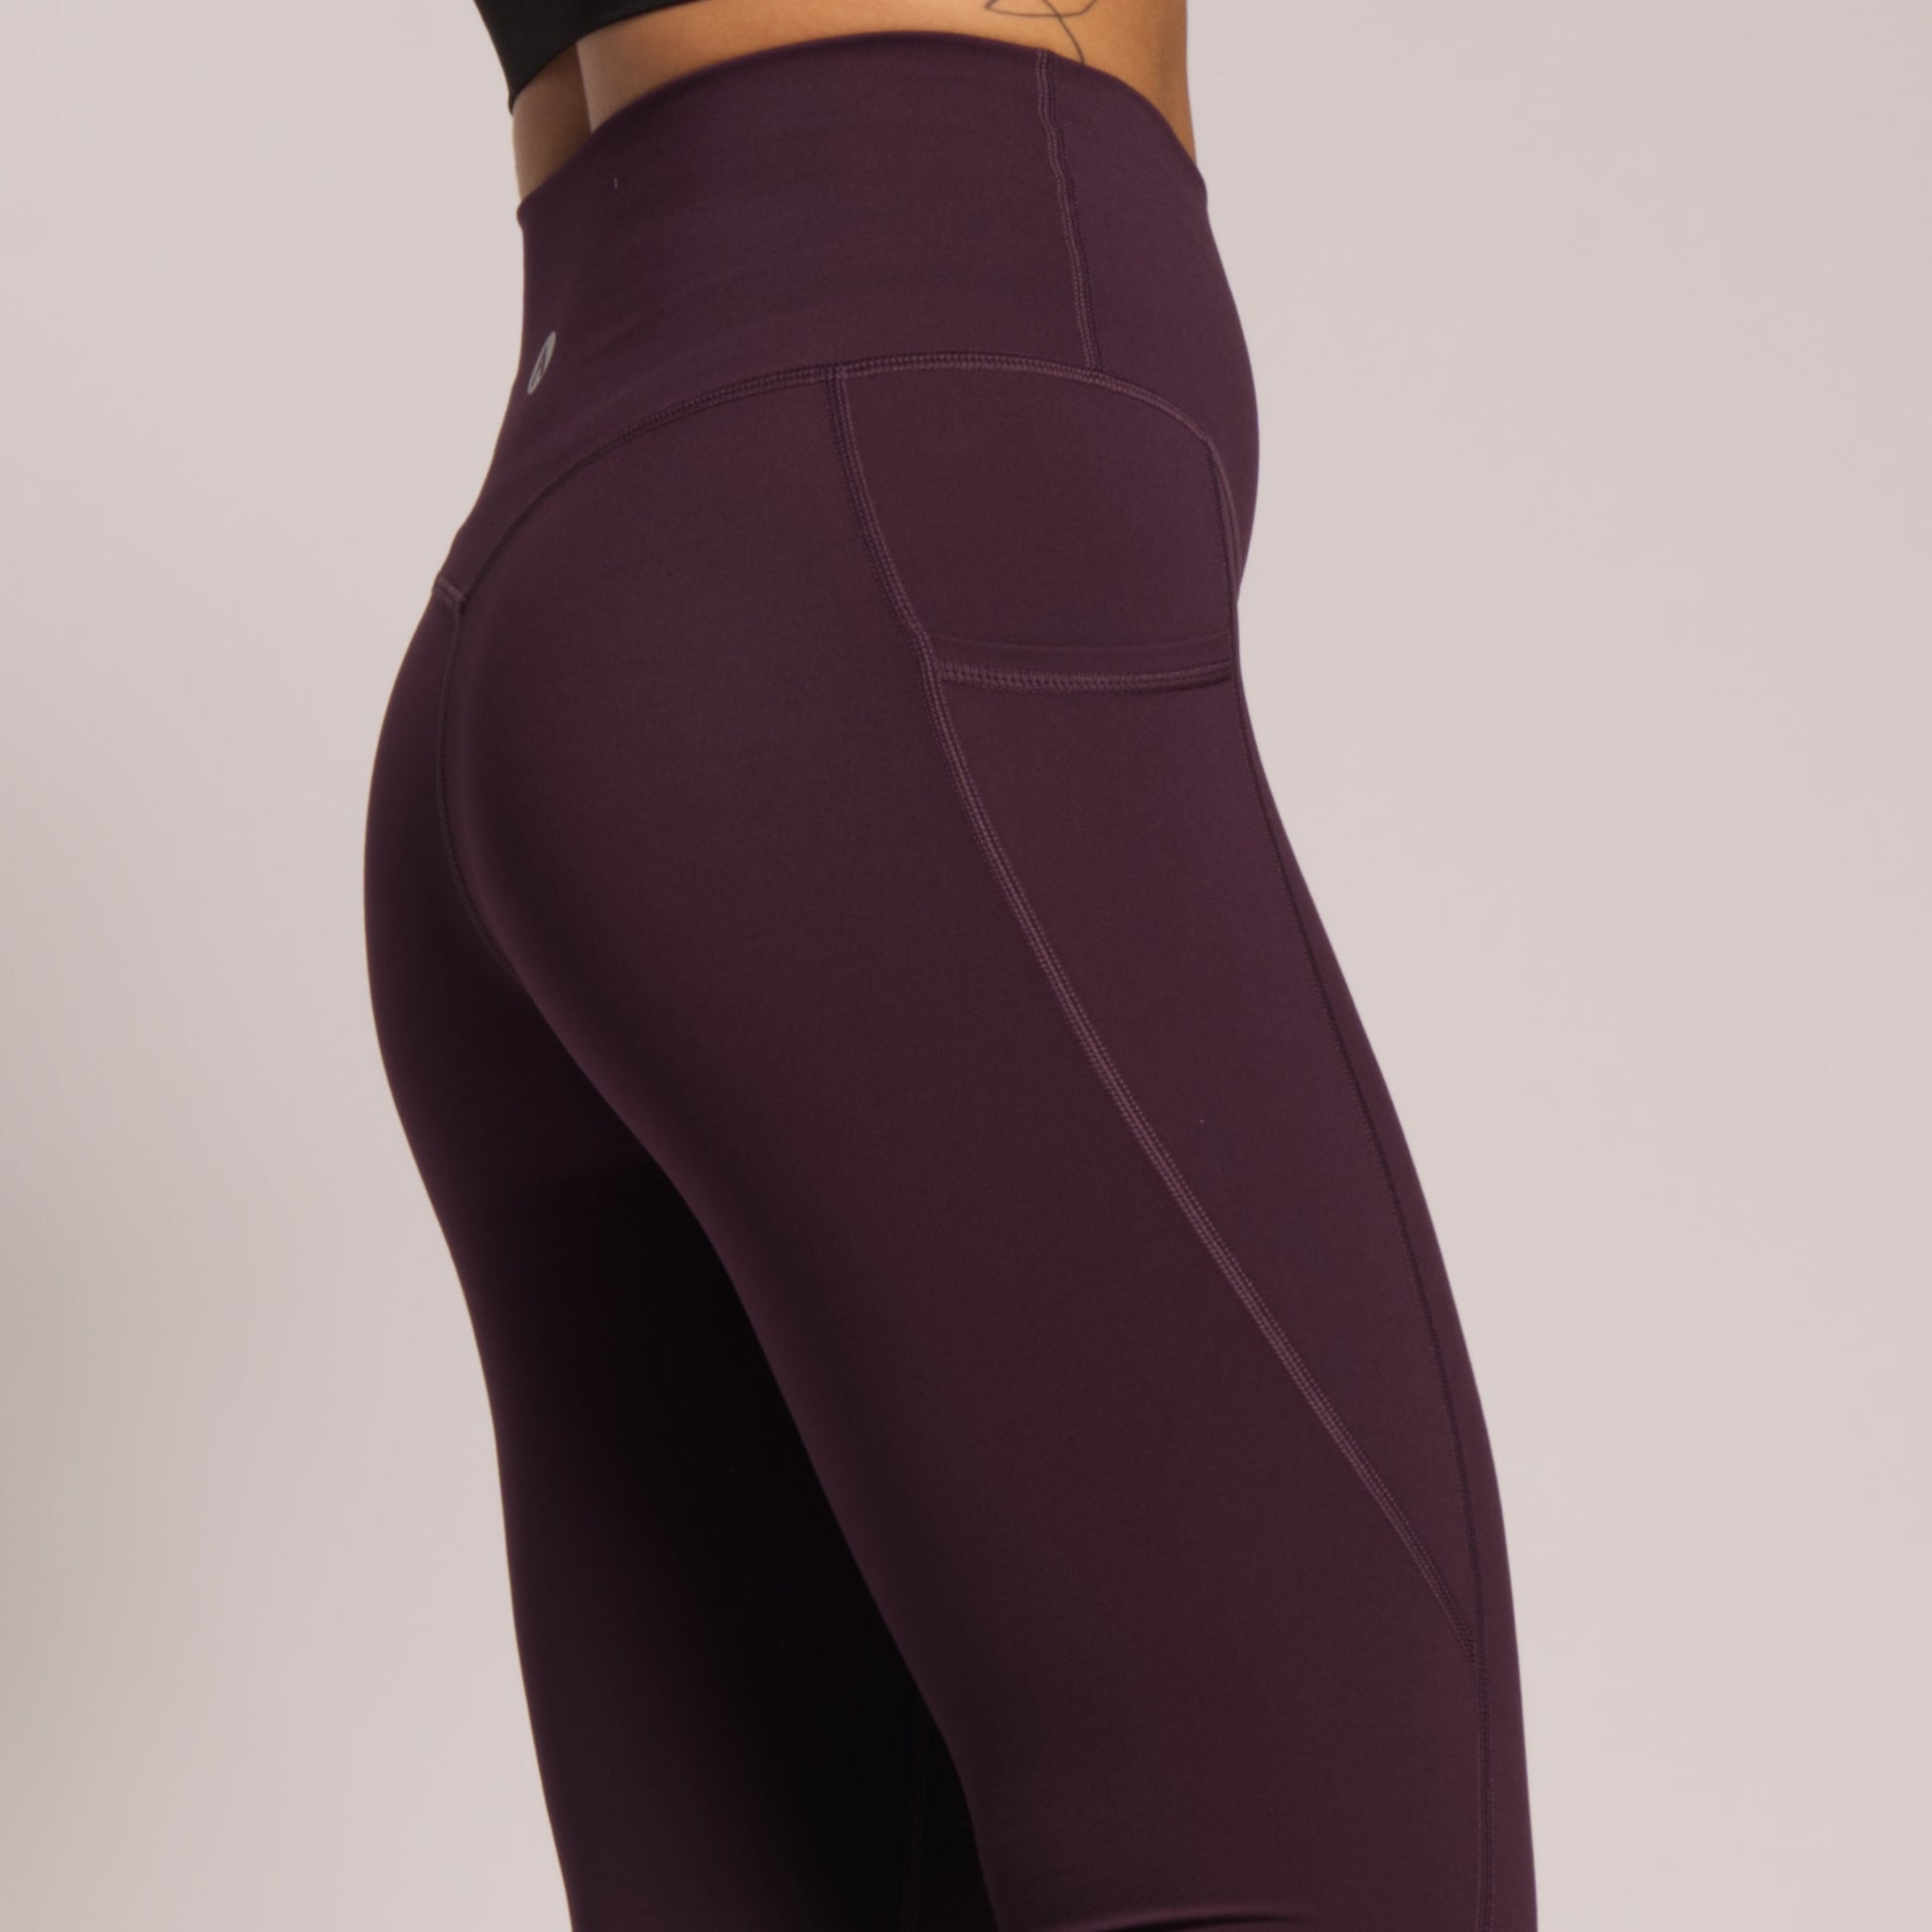 Gym leggings with pockets 